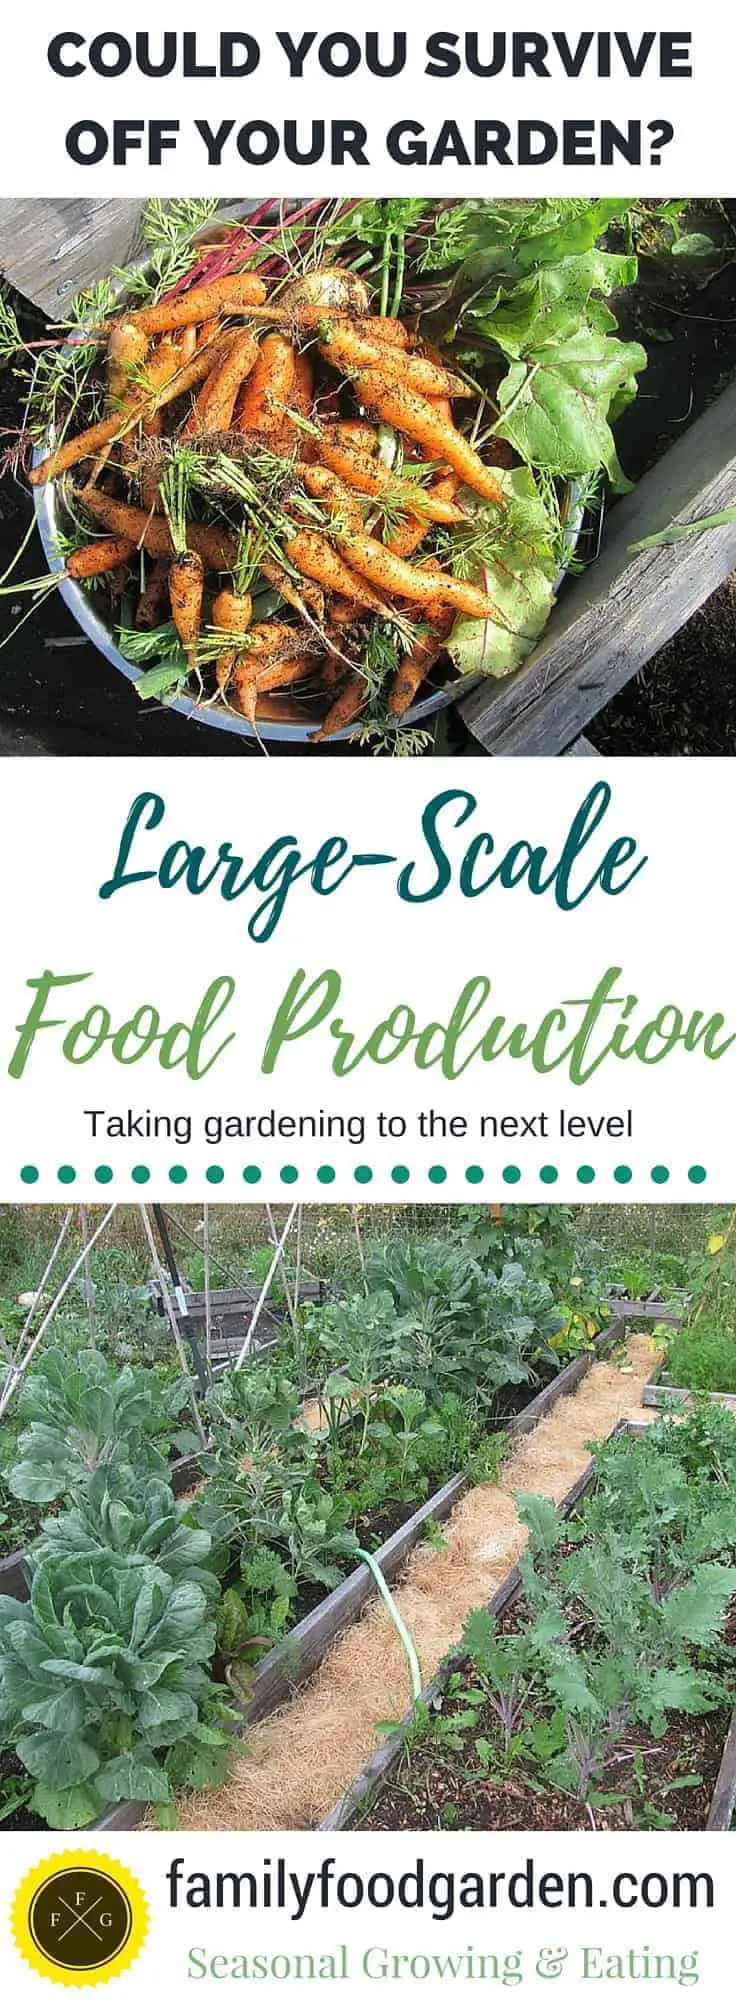 Large-Scale Vegetable Gardening to Feed your Family